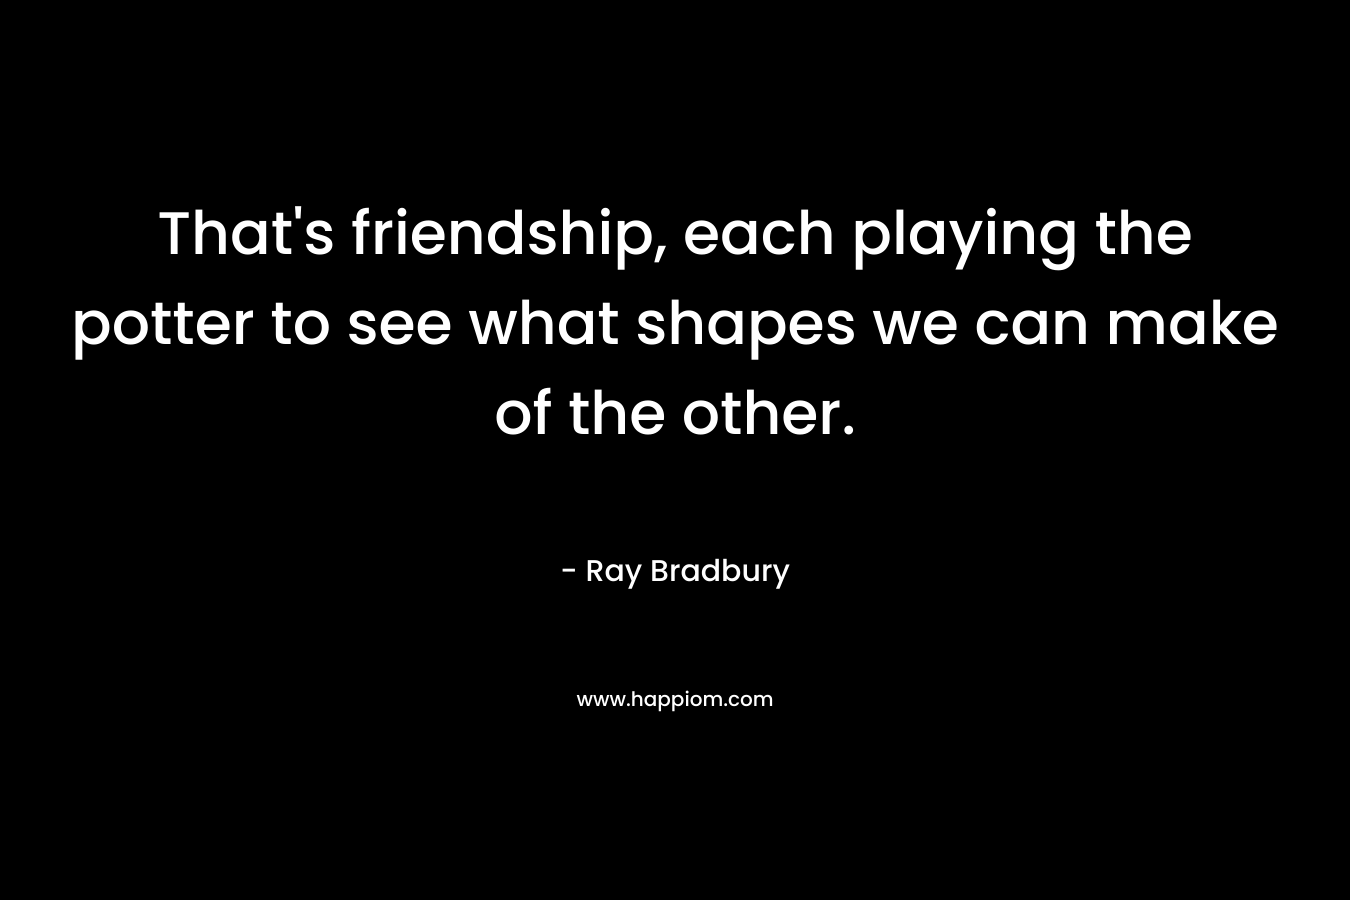 That’s friendship, each playing the potter to see what shapes we can make of the other. – Ray Bradbury